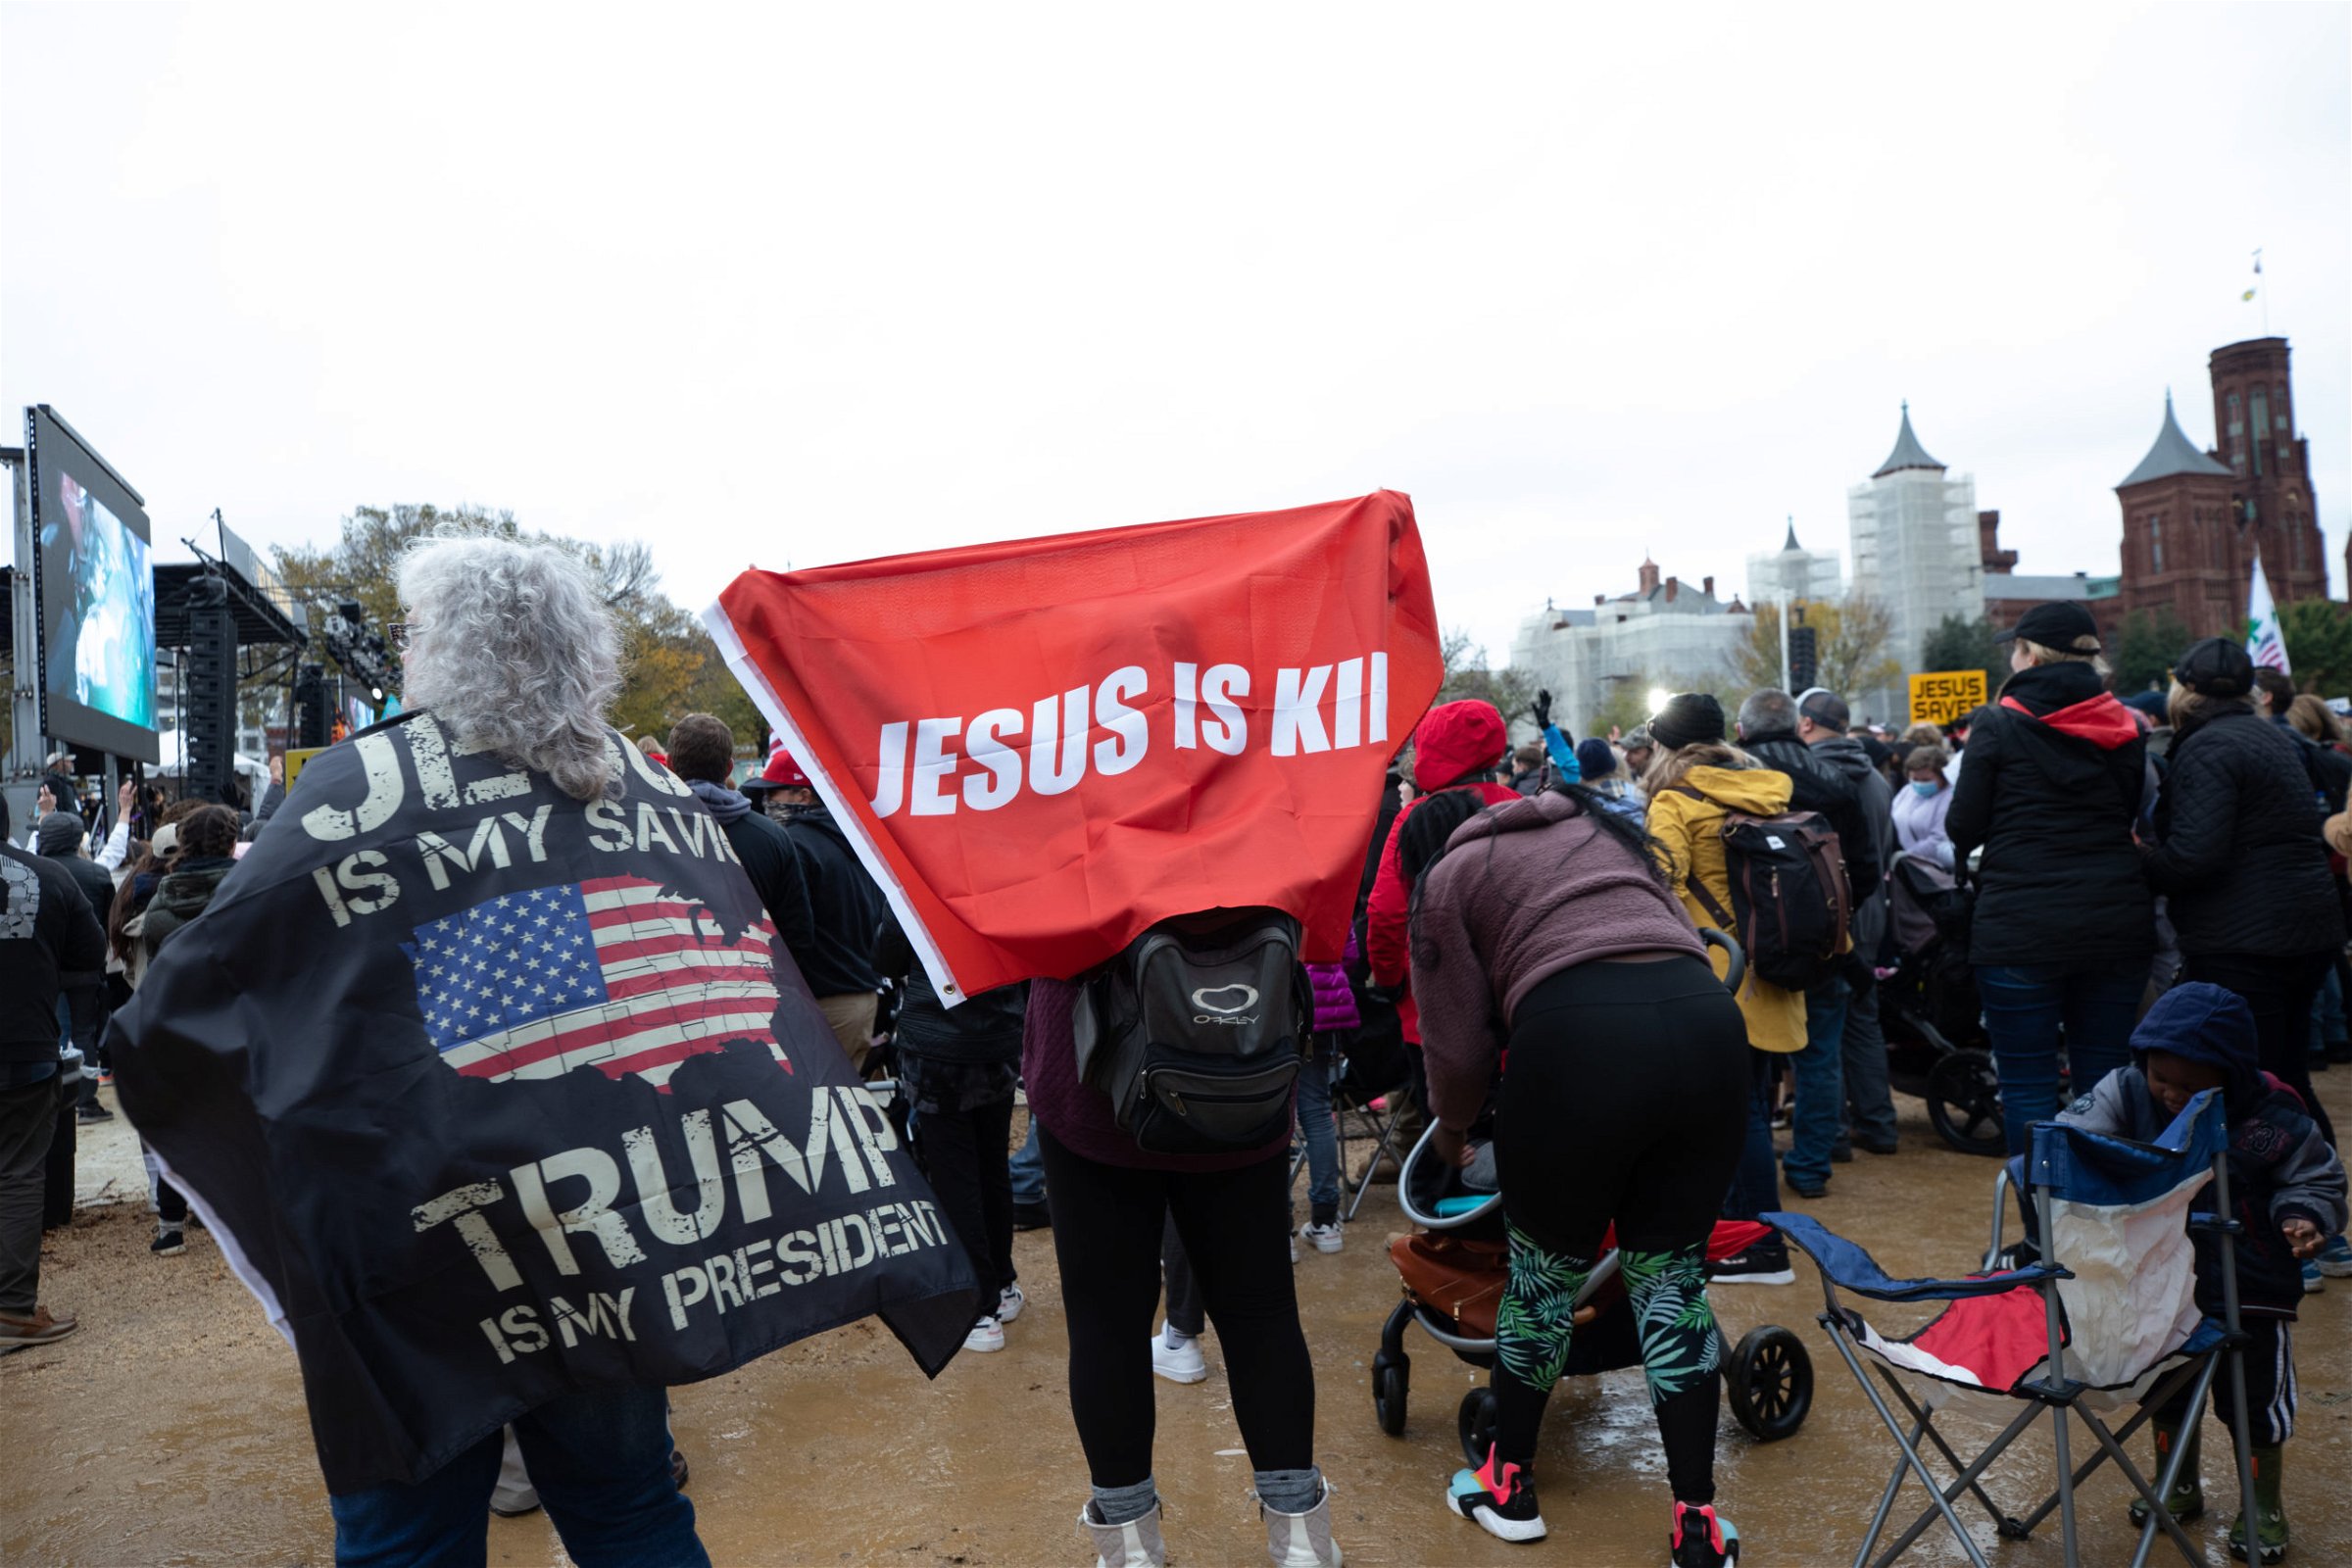 Attendees carried various Trump, Jesus, and American flags at the "Let Us Worship" protest in Washington, D.C. on October 25, 2020. (Kaylee Greenlee - DCNF)